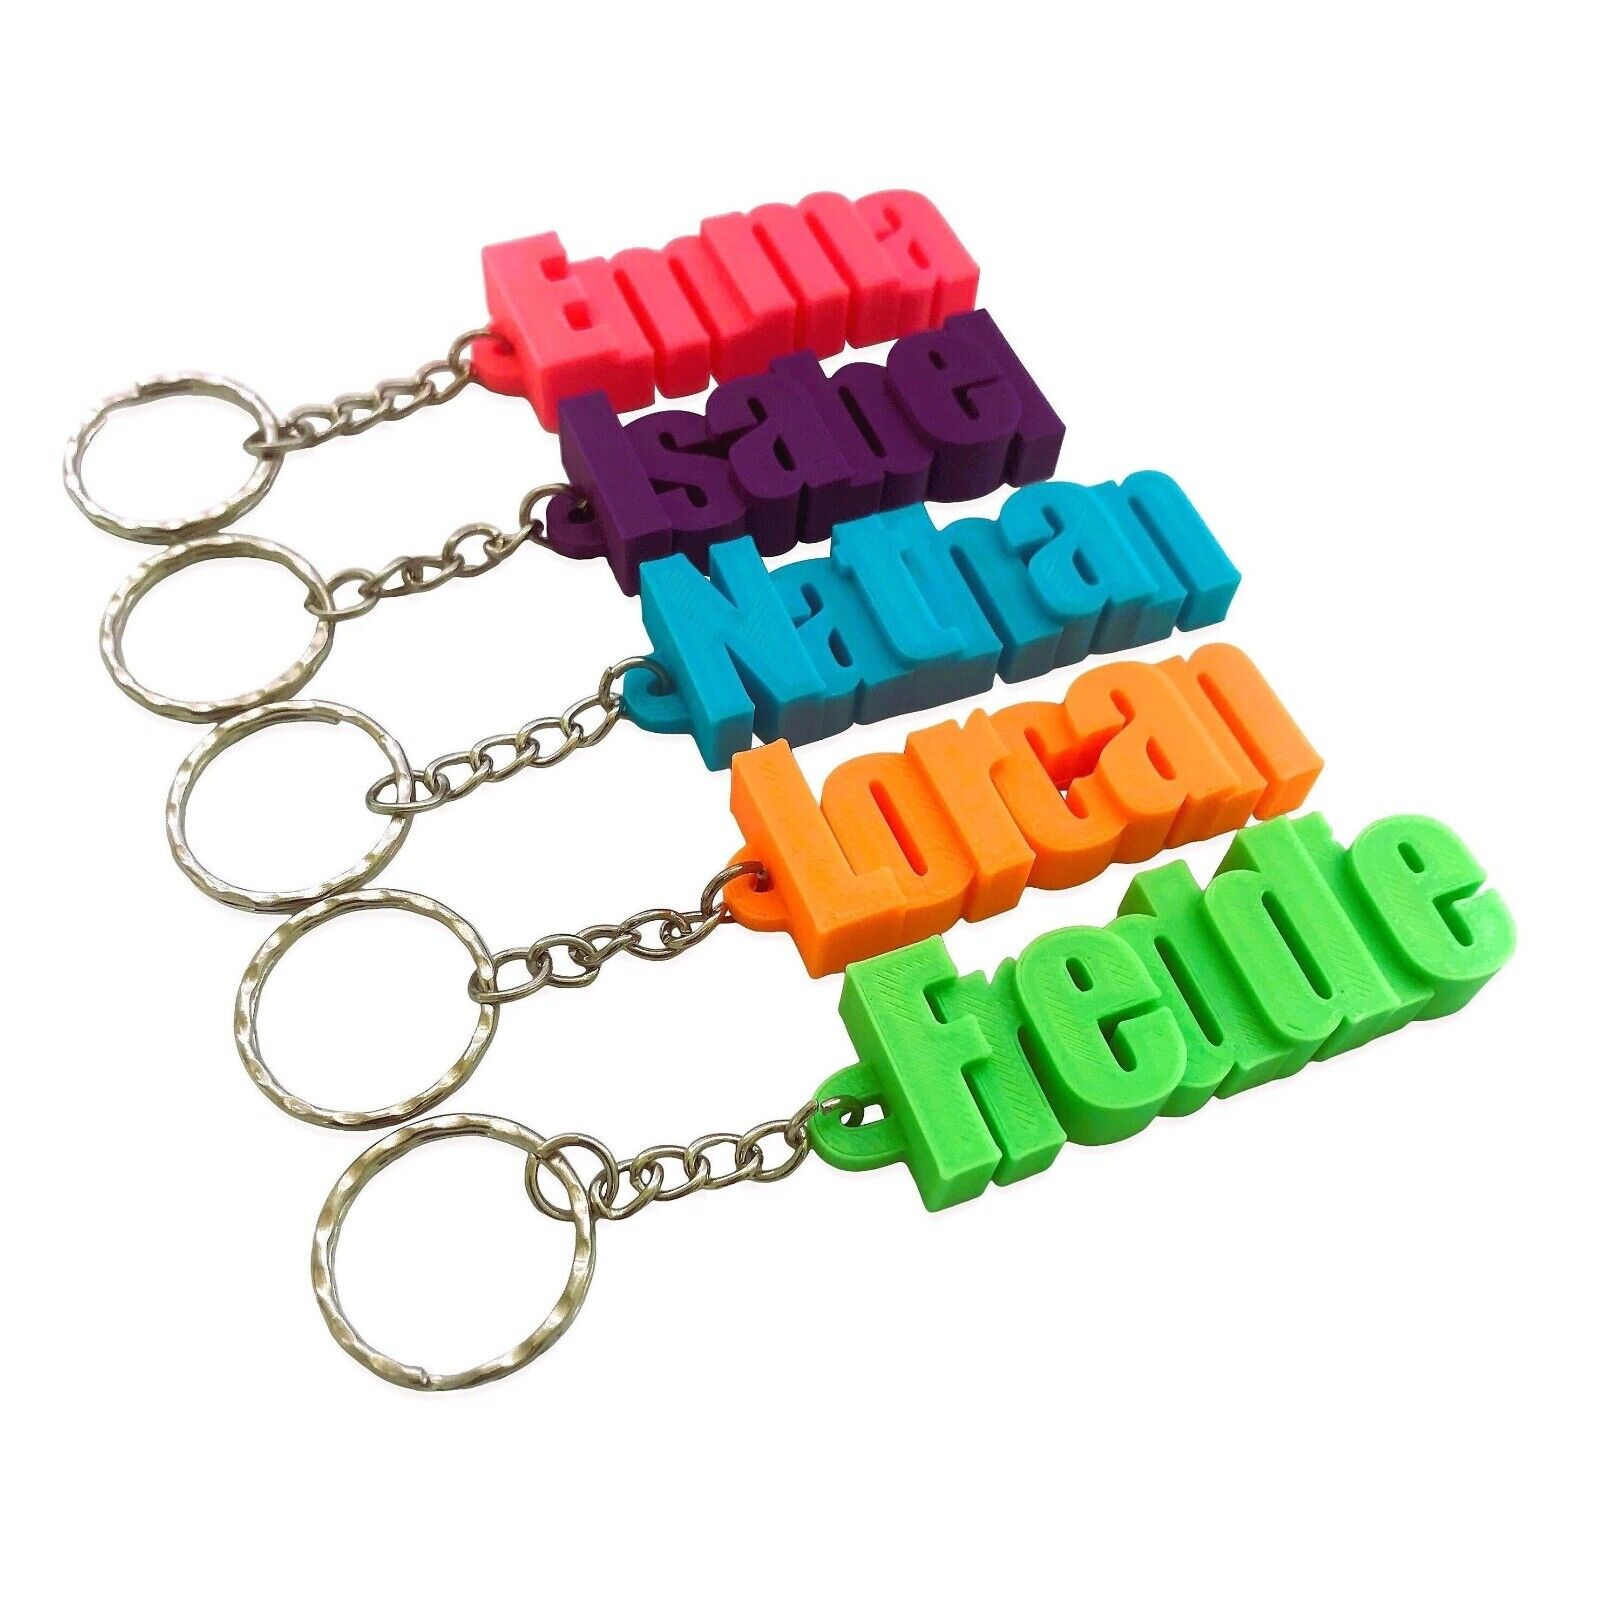 3D Personalised Keyring - Party Bag / Gifts / Name Tags / School Bag / Travel